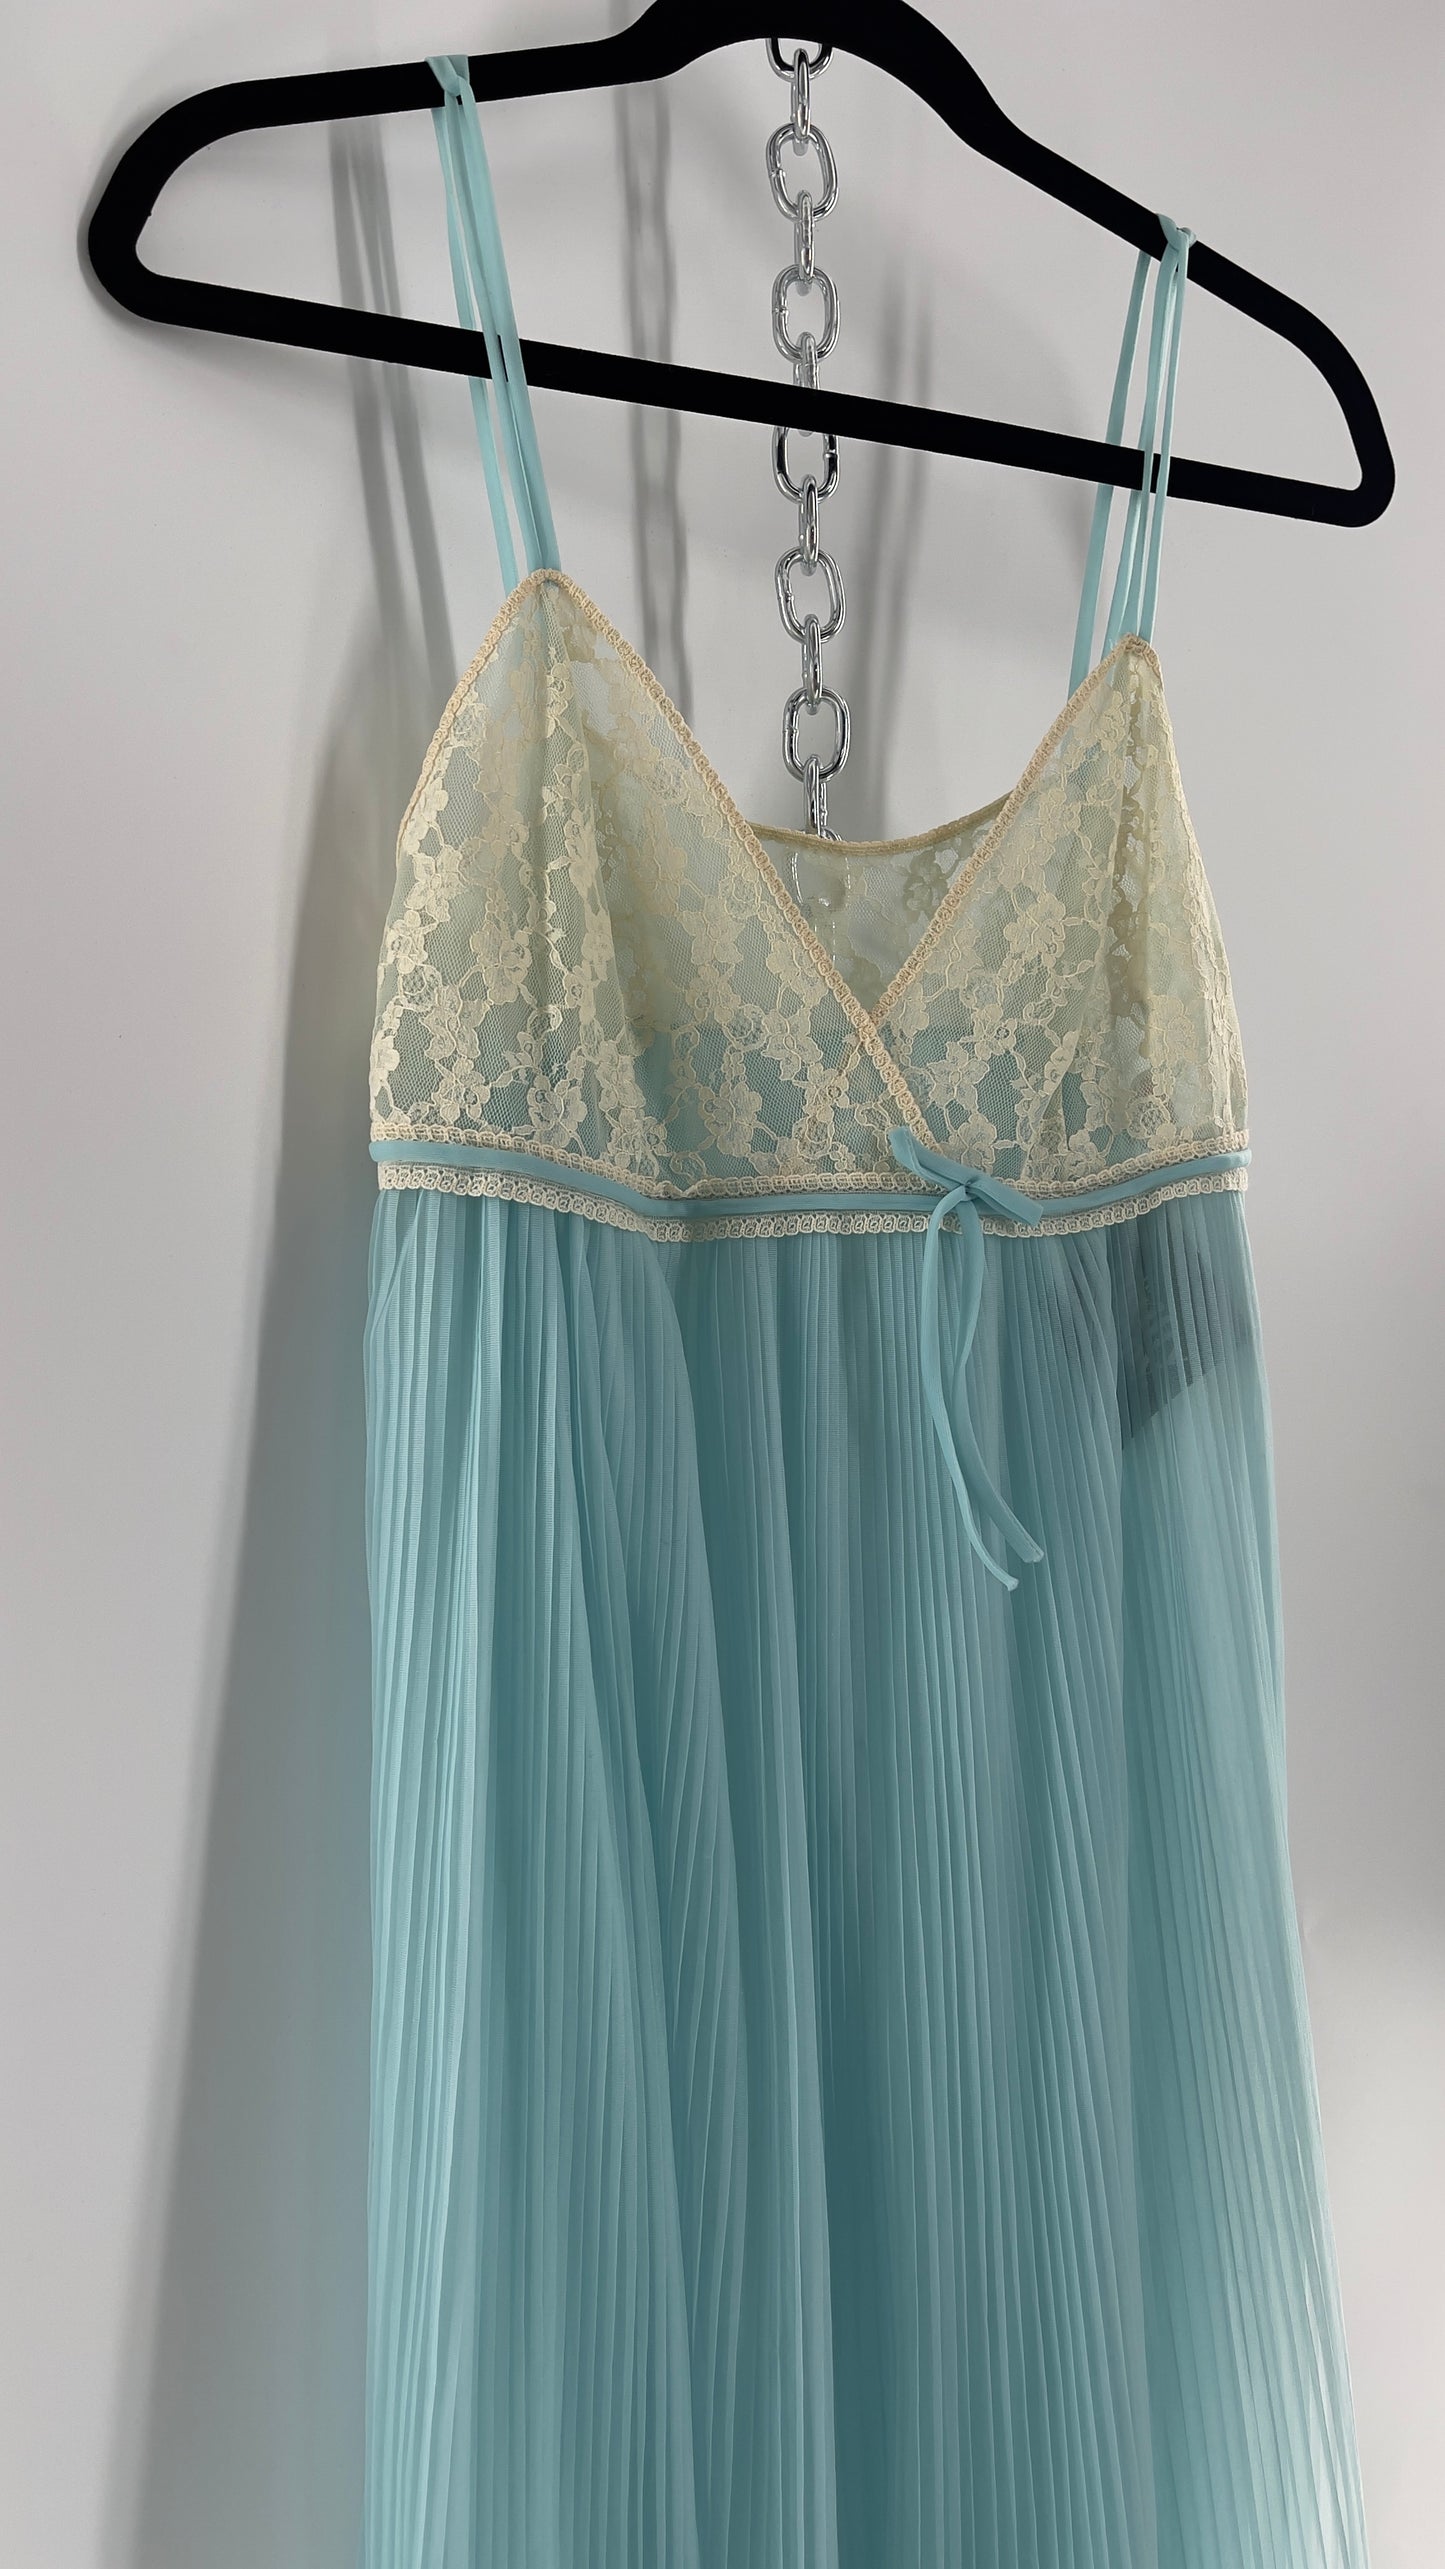 Vintage 1960s Baby Blue Nightgown Maxi Dress (Small)